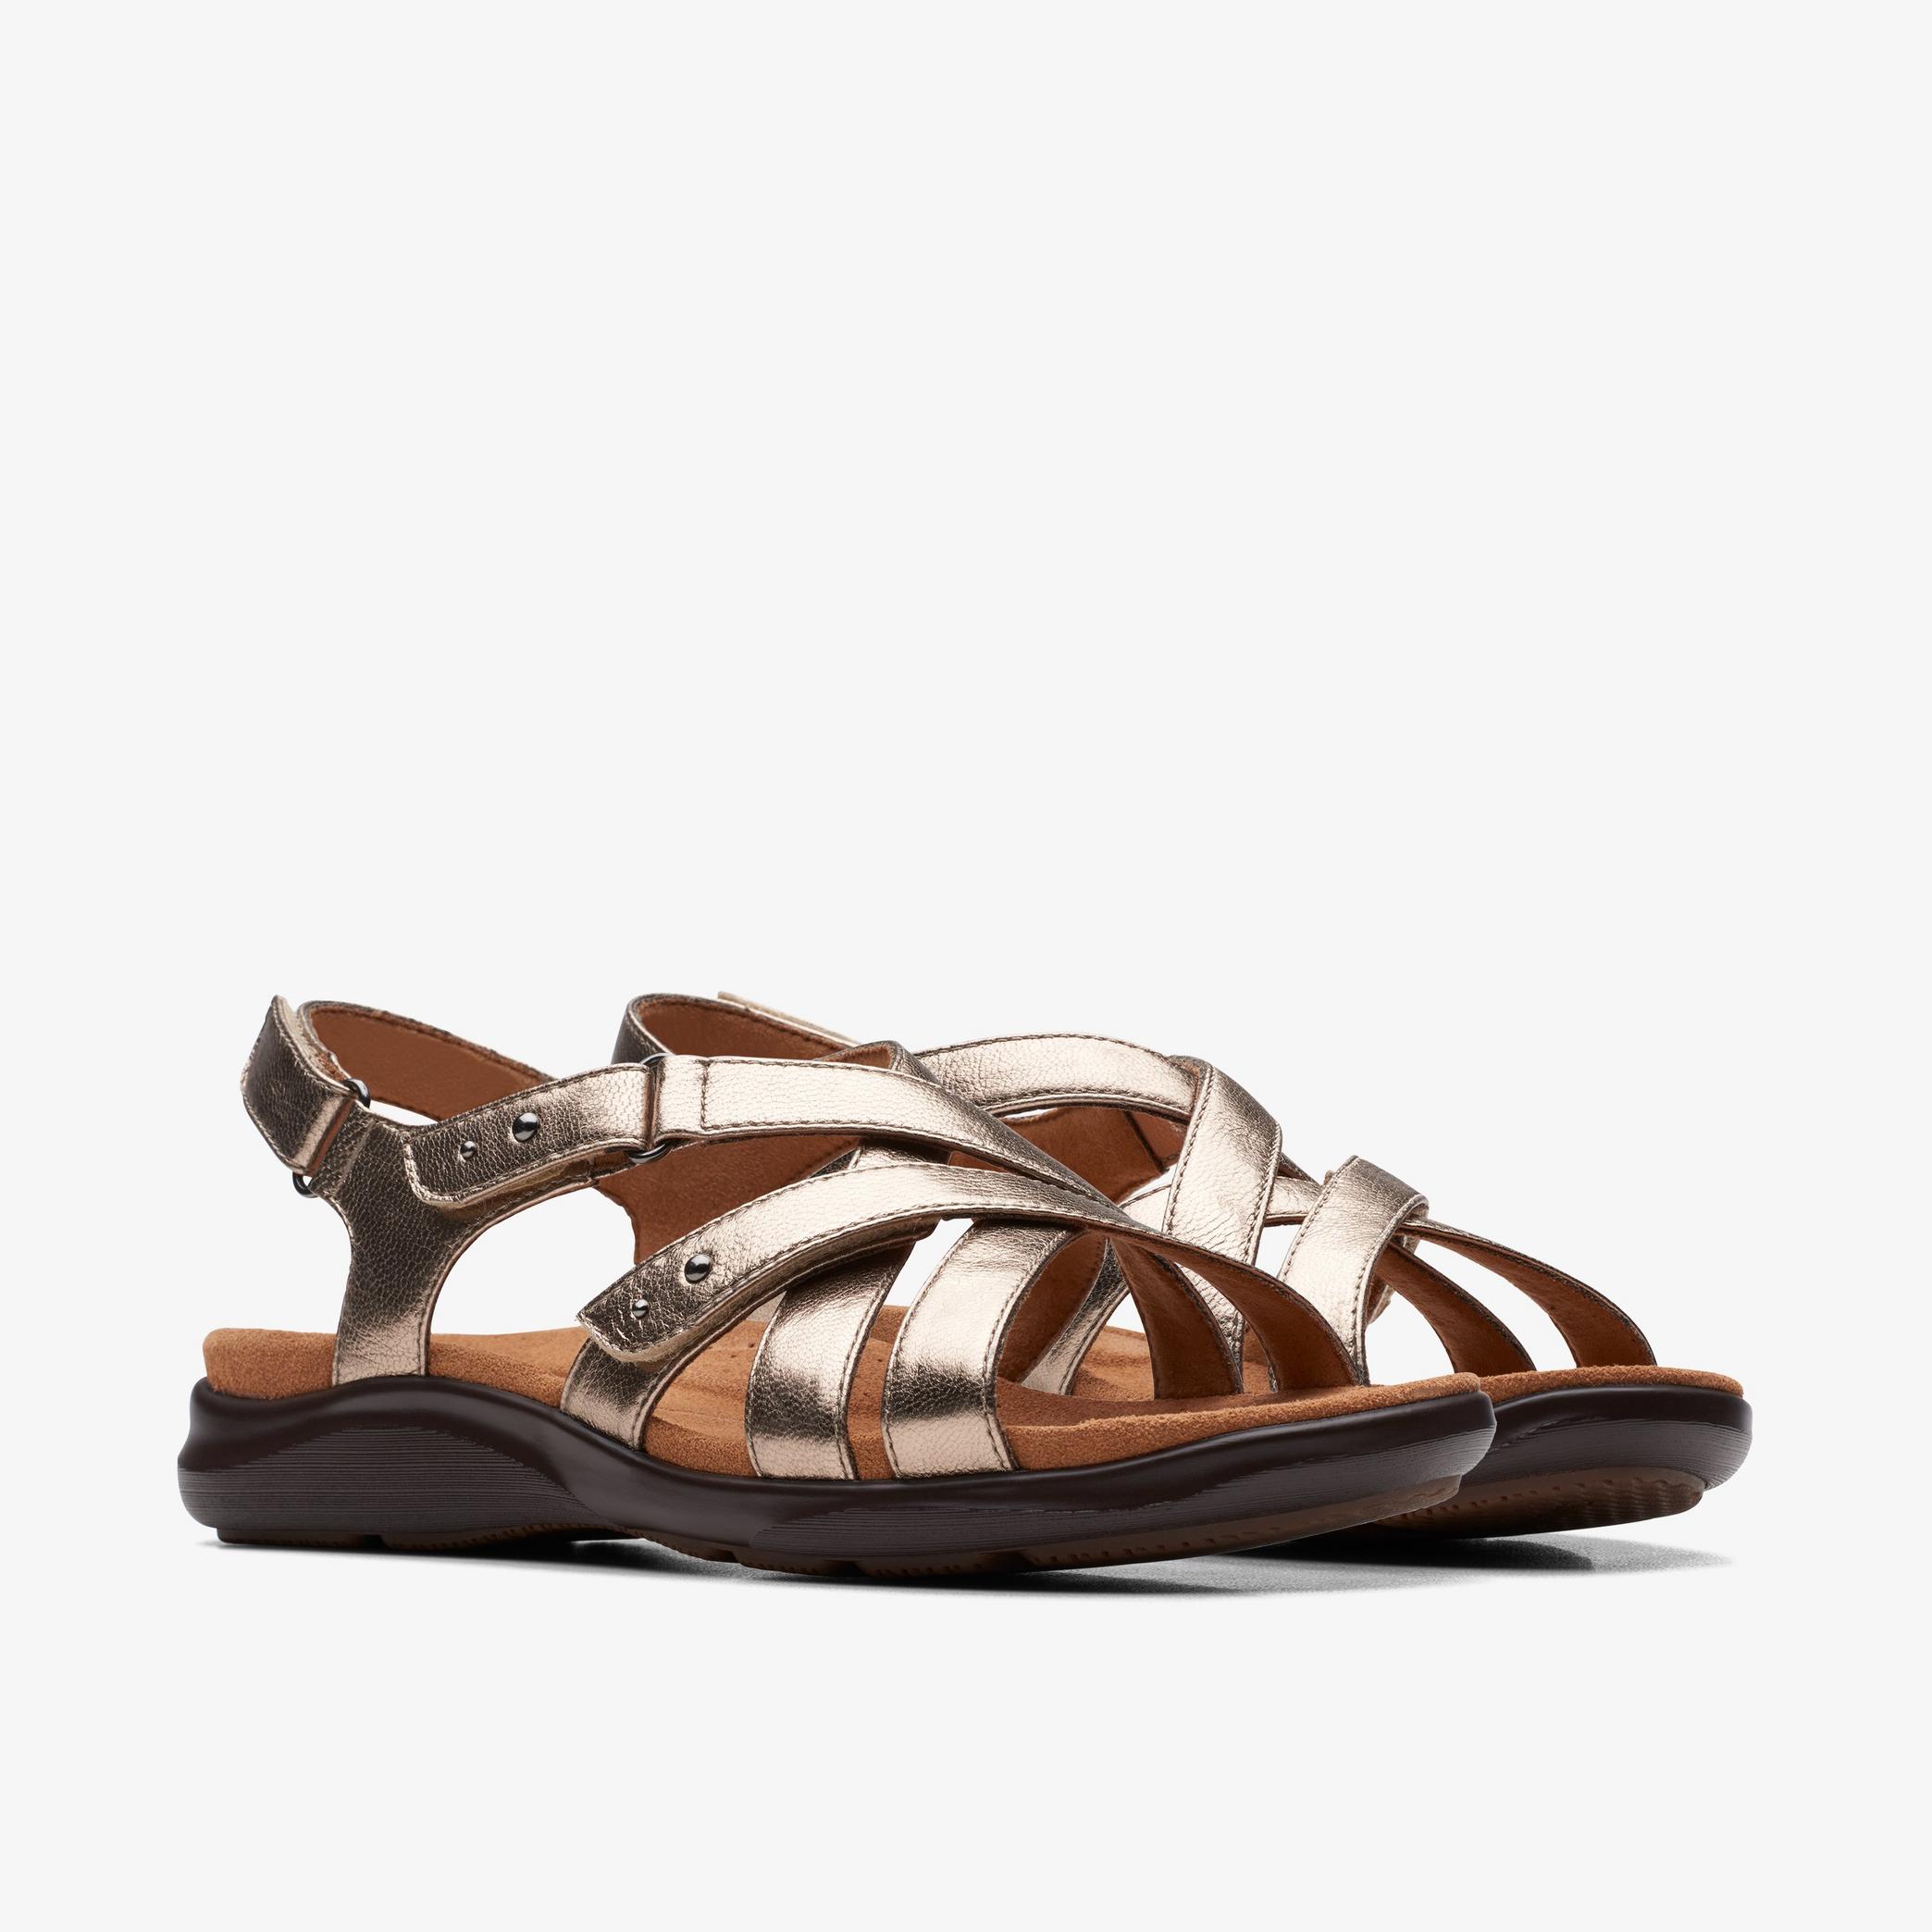 Kitly Go Metallic Flat Sandals, view 4 of 6